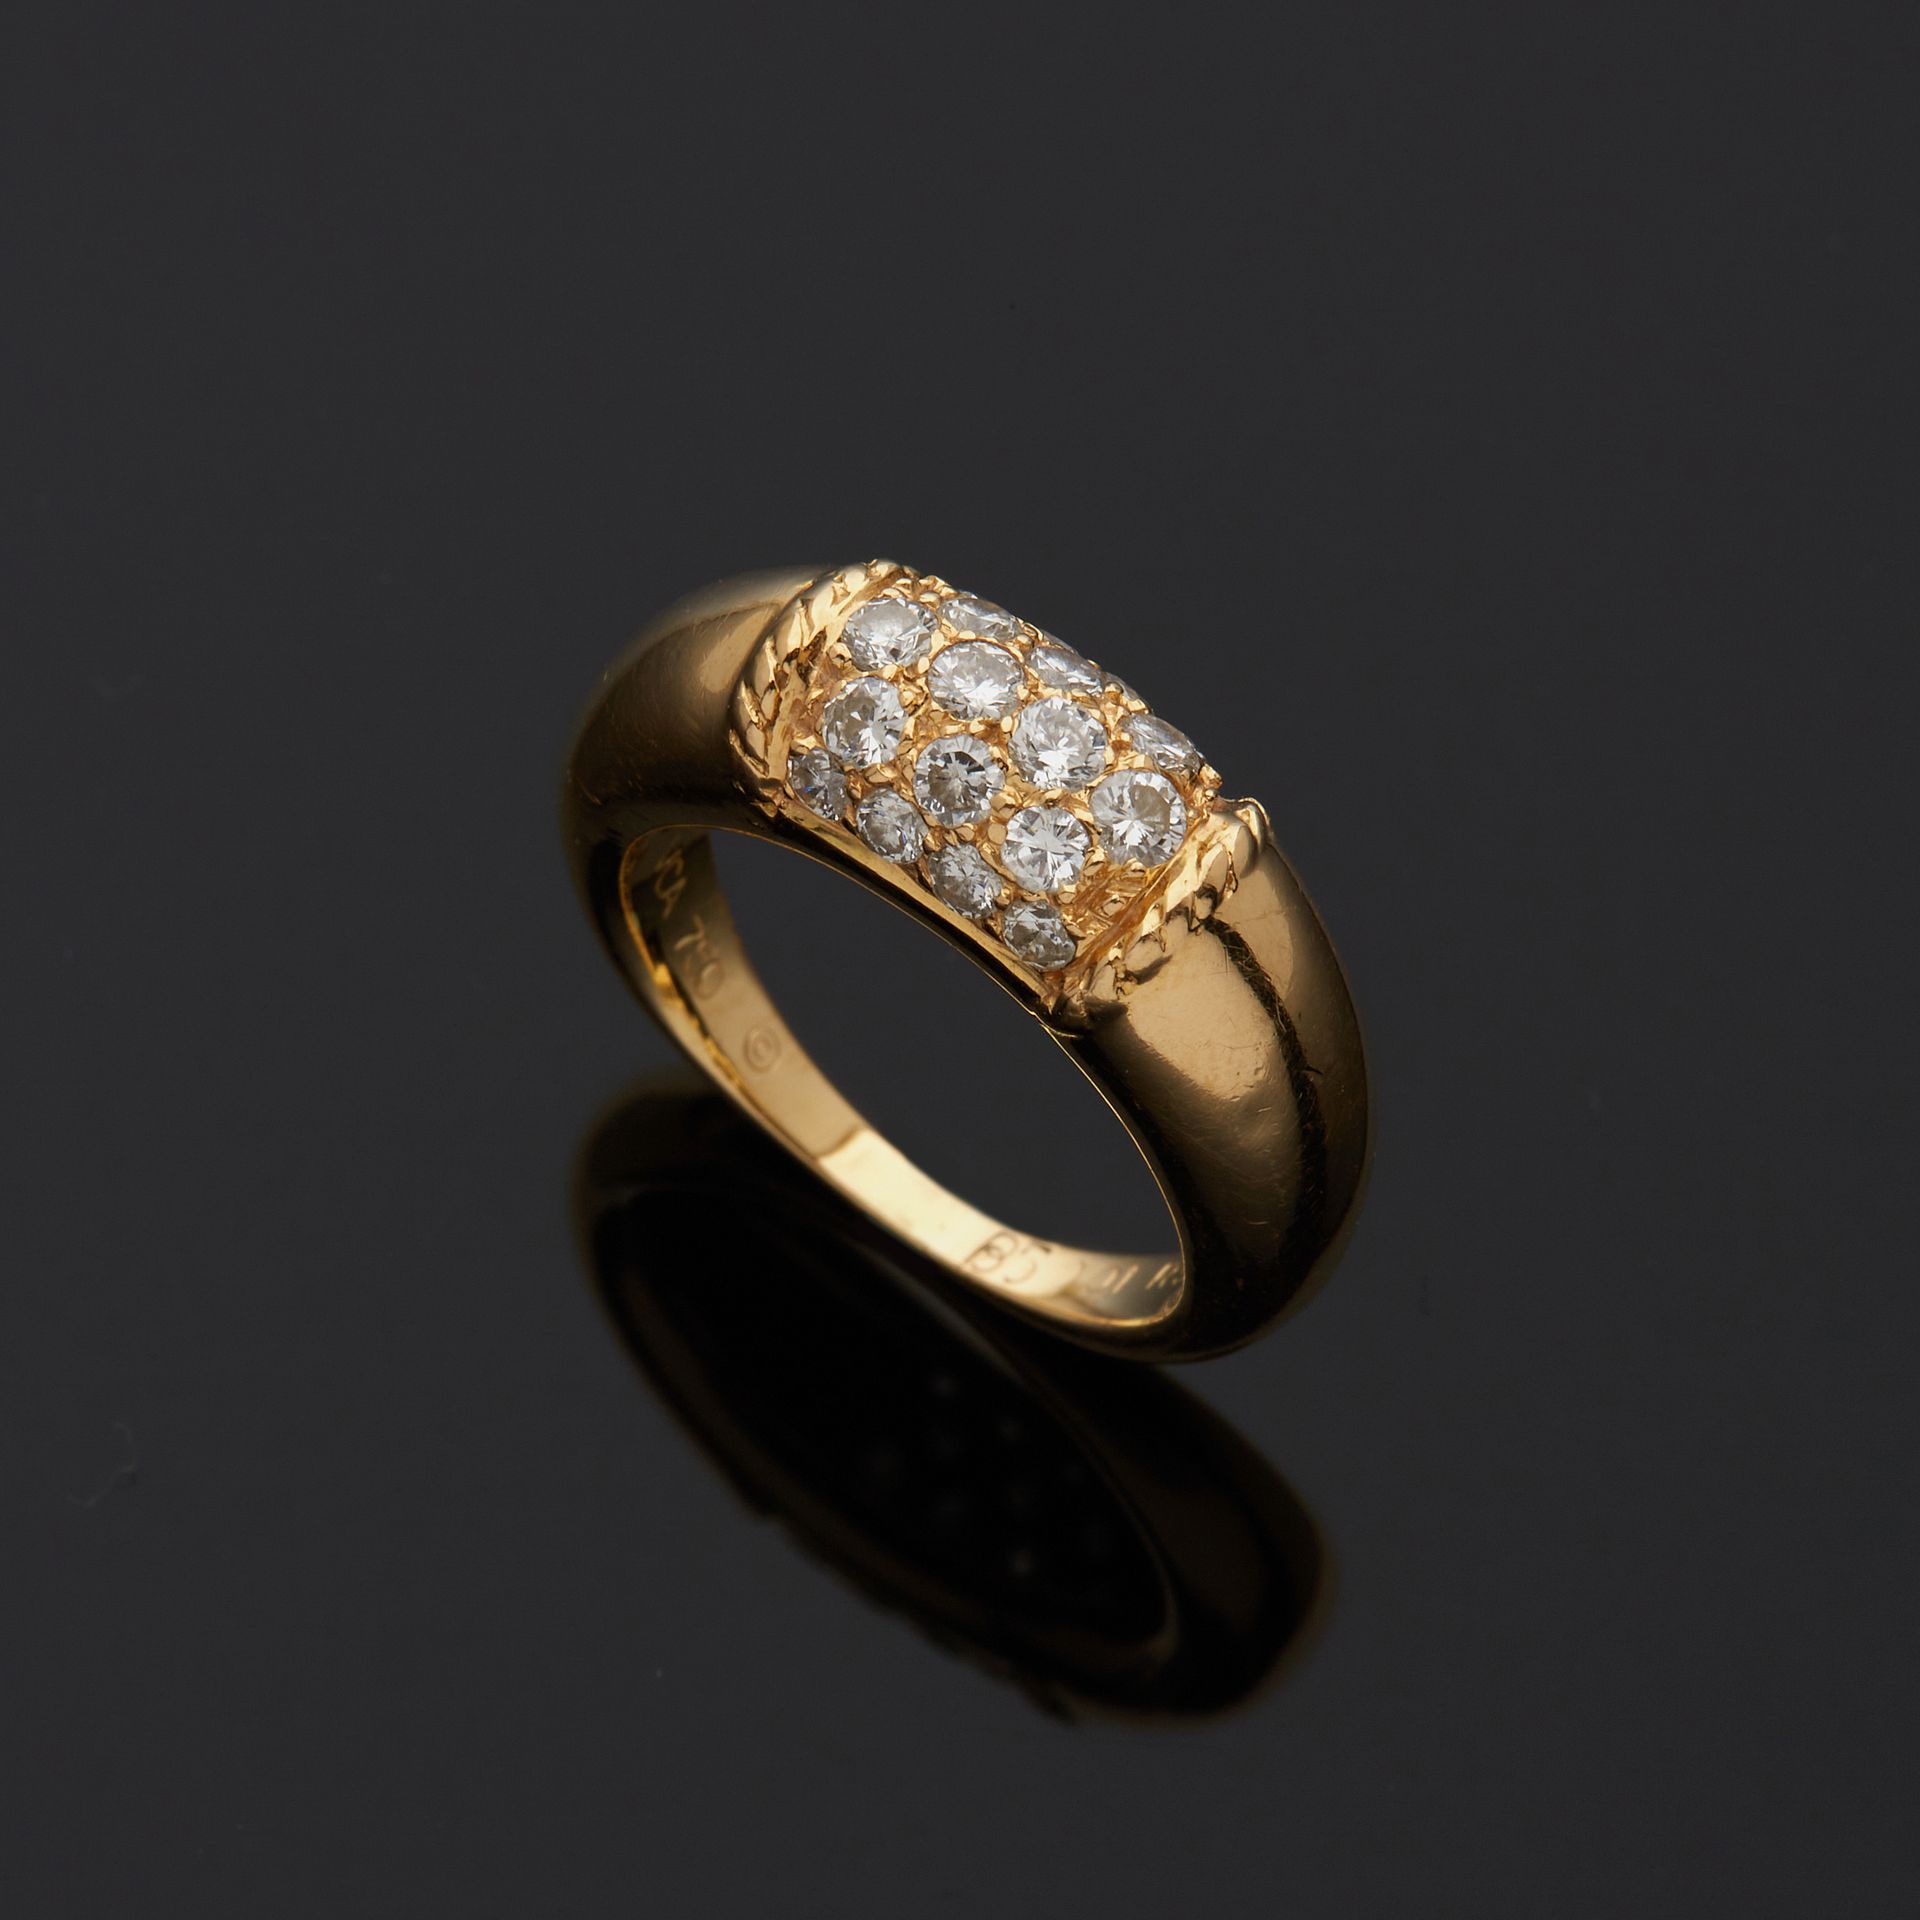 Null VAN CLEEF ARPELS.
Philippine ring in yellow gold 750 mm decorated with a pa&hellip;